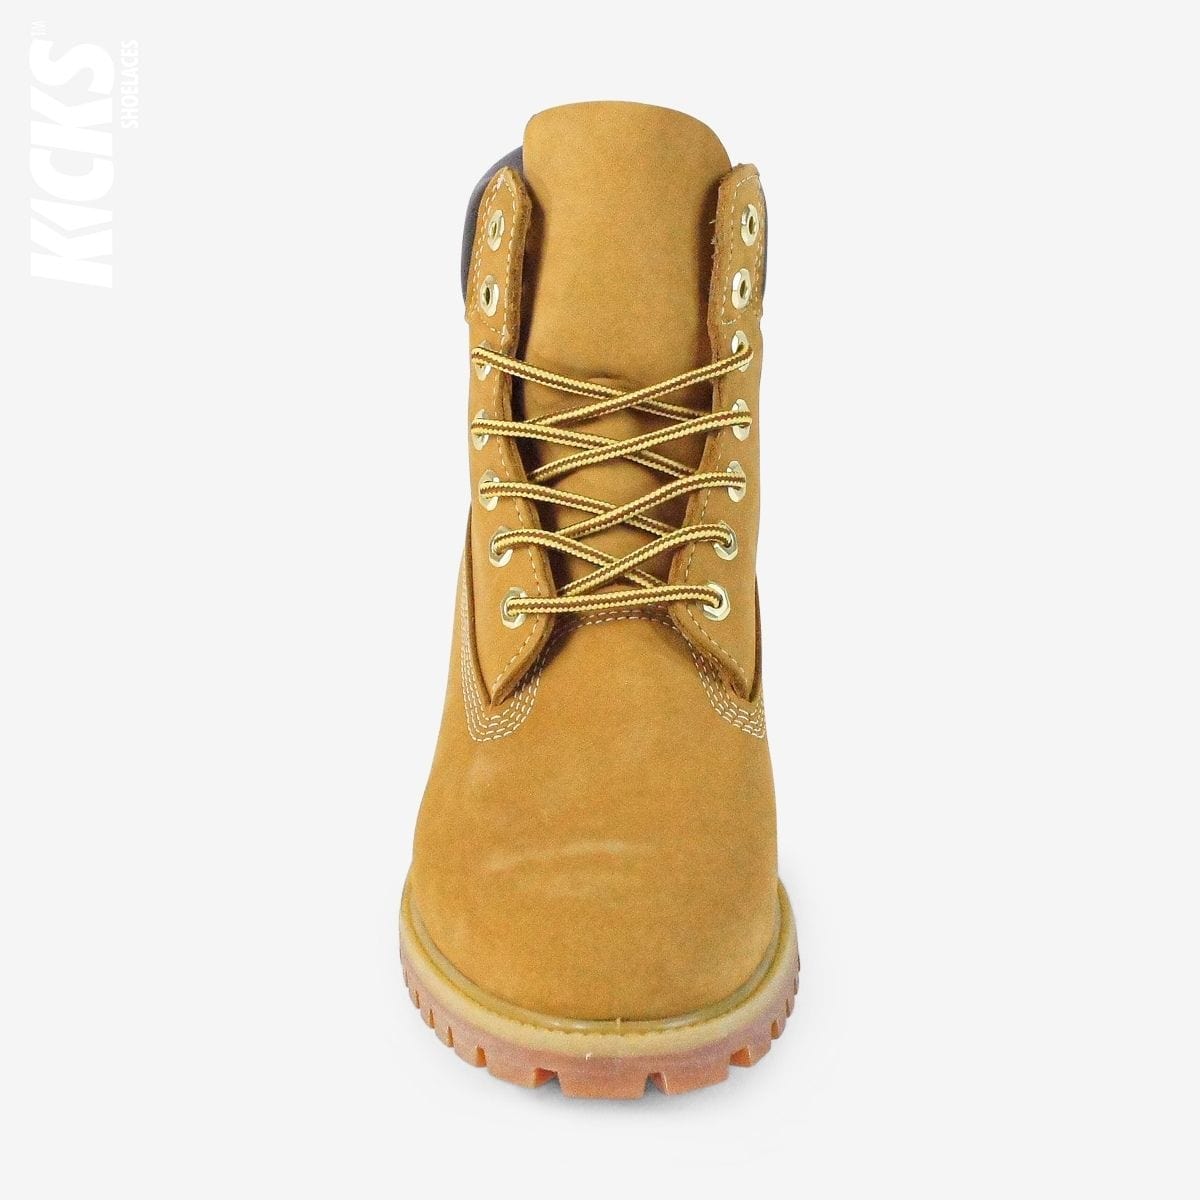 deep-brown-and-yellow-boot-laces-for-adult-kids-unisex